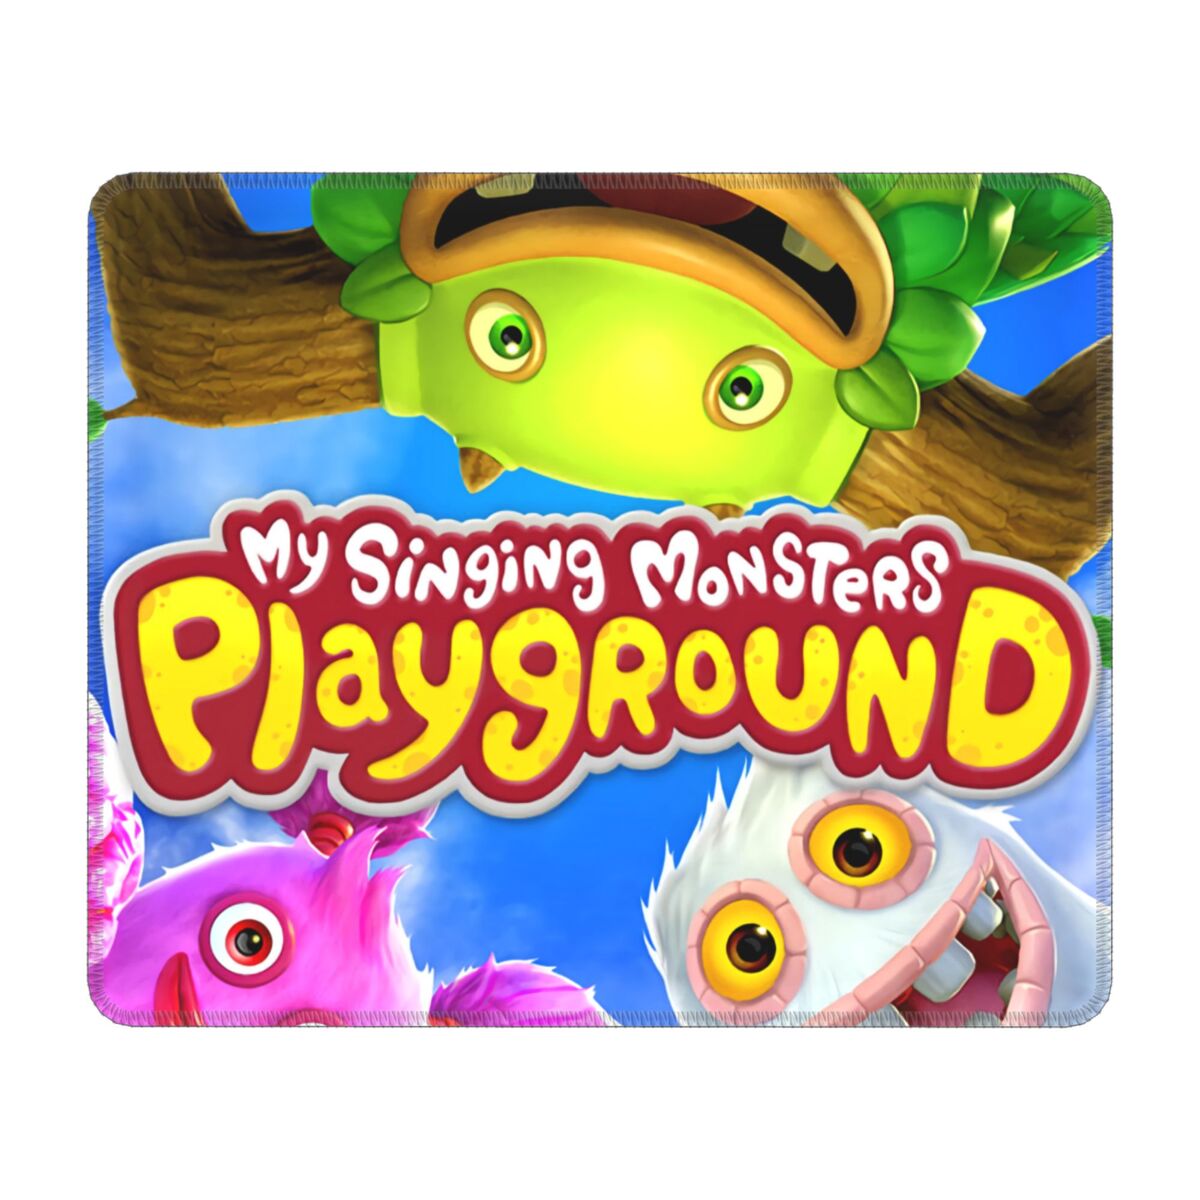 Customized Gaming Mouse Pad Non Slip Rubber Base My Singing Monsters Playground Mousepad Office Desk Video - My Singing Monsters Plush